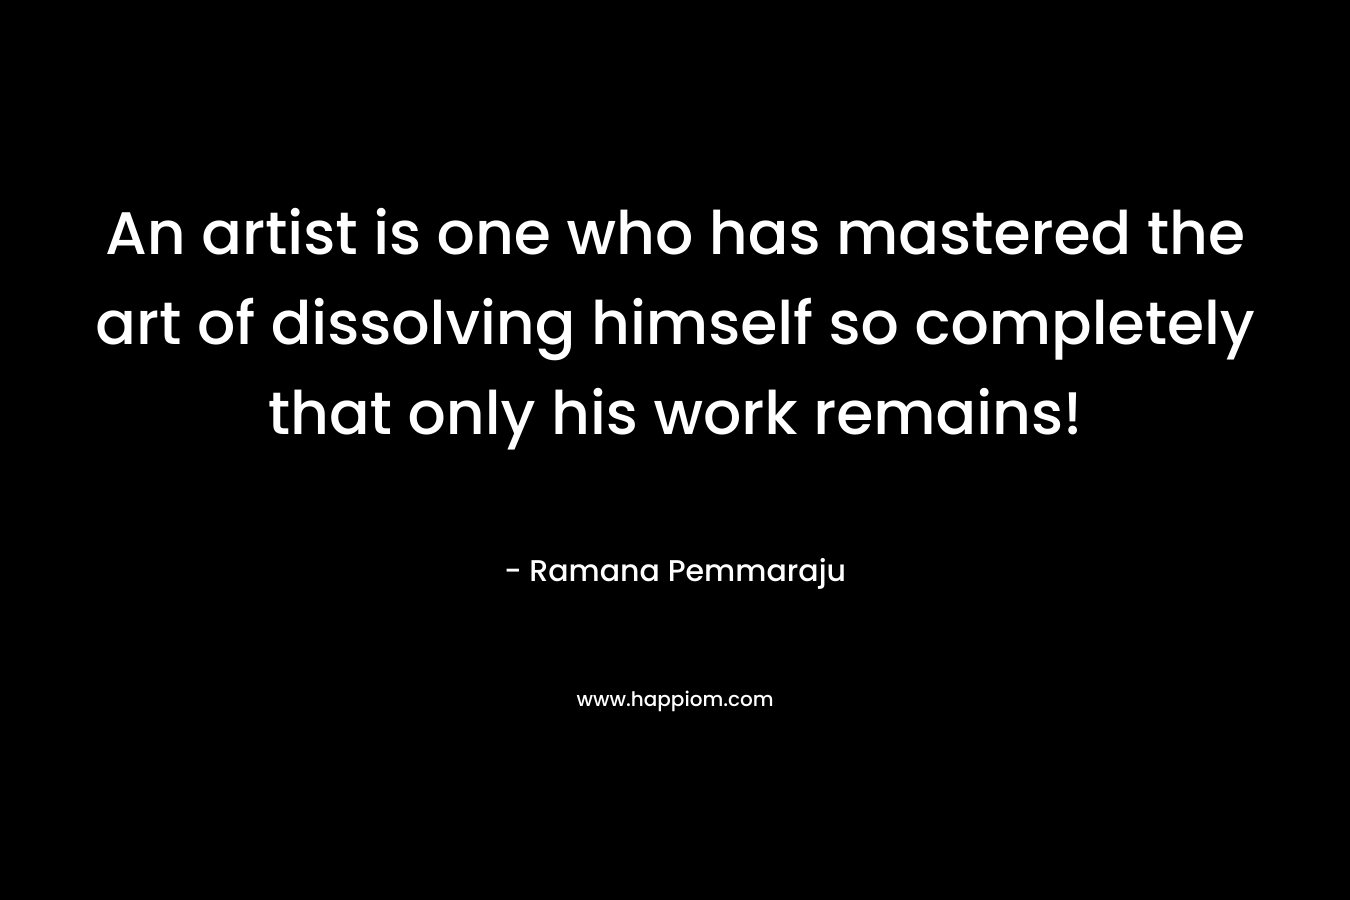 An artist is one who has mastered the art of dissolving himself so completely that only his work remains!